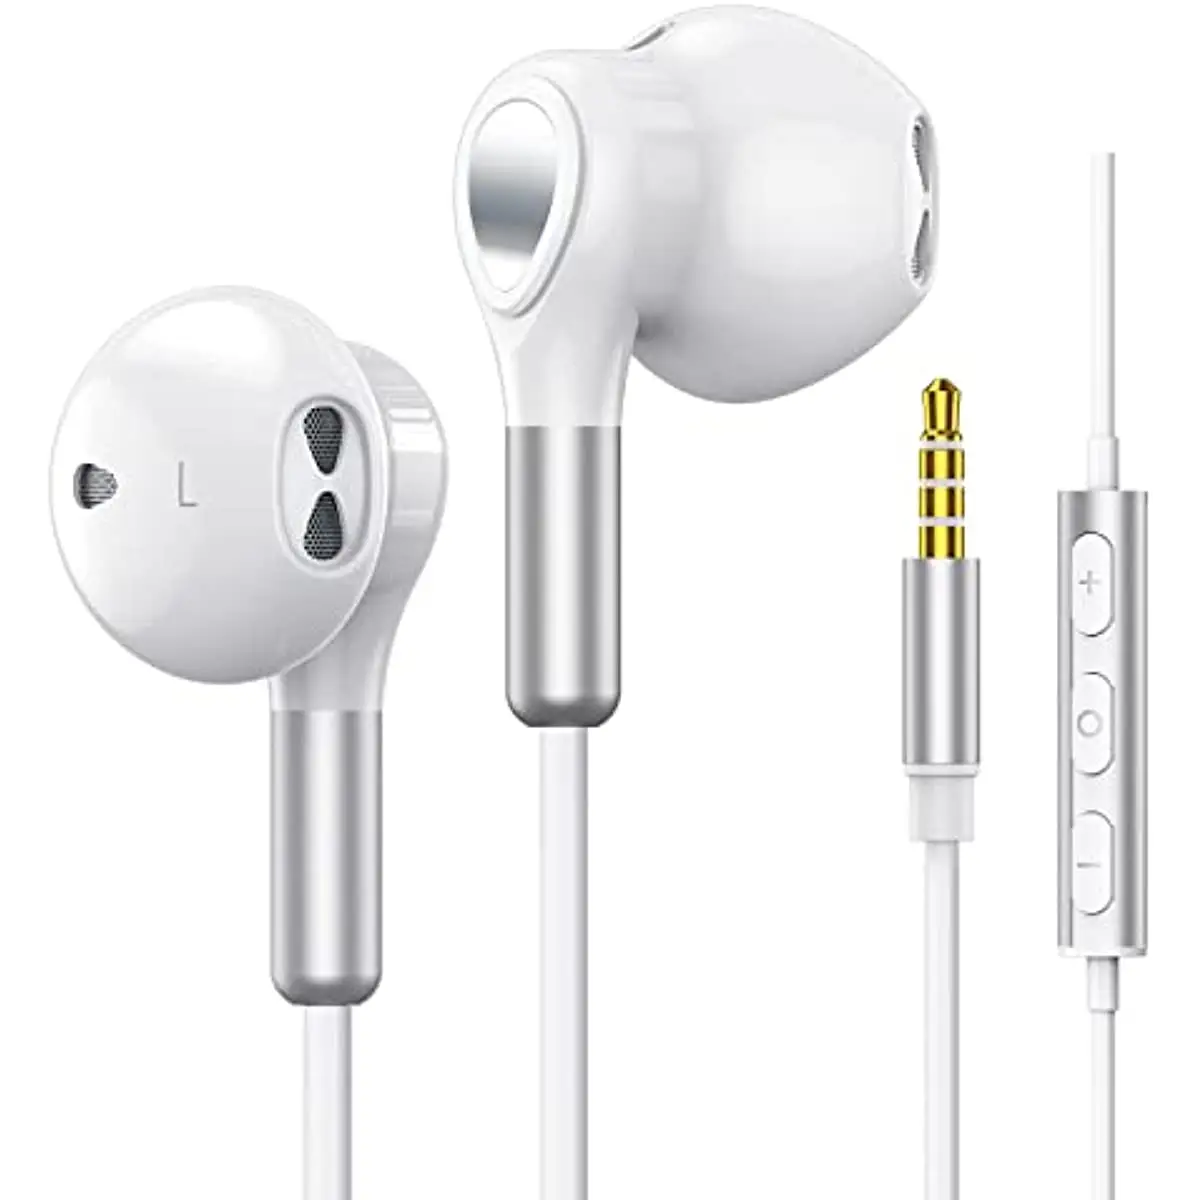 Wired Earbuds Headphones with Microphone, Half in-Ear Headphones with Mic Built-in Volume Control, High Bass Stereo Wired